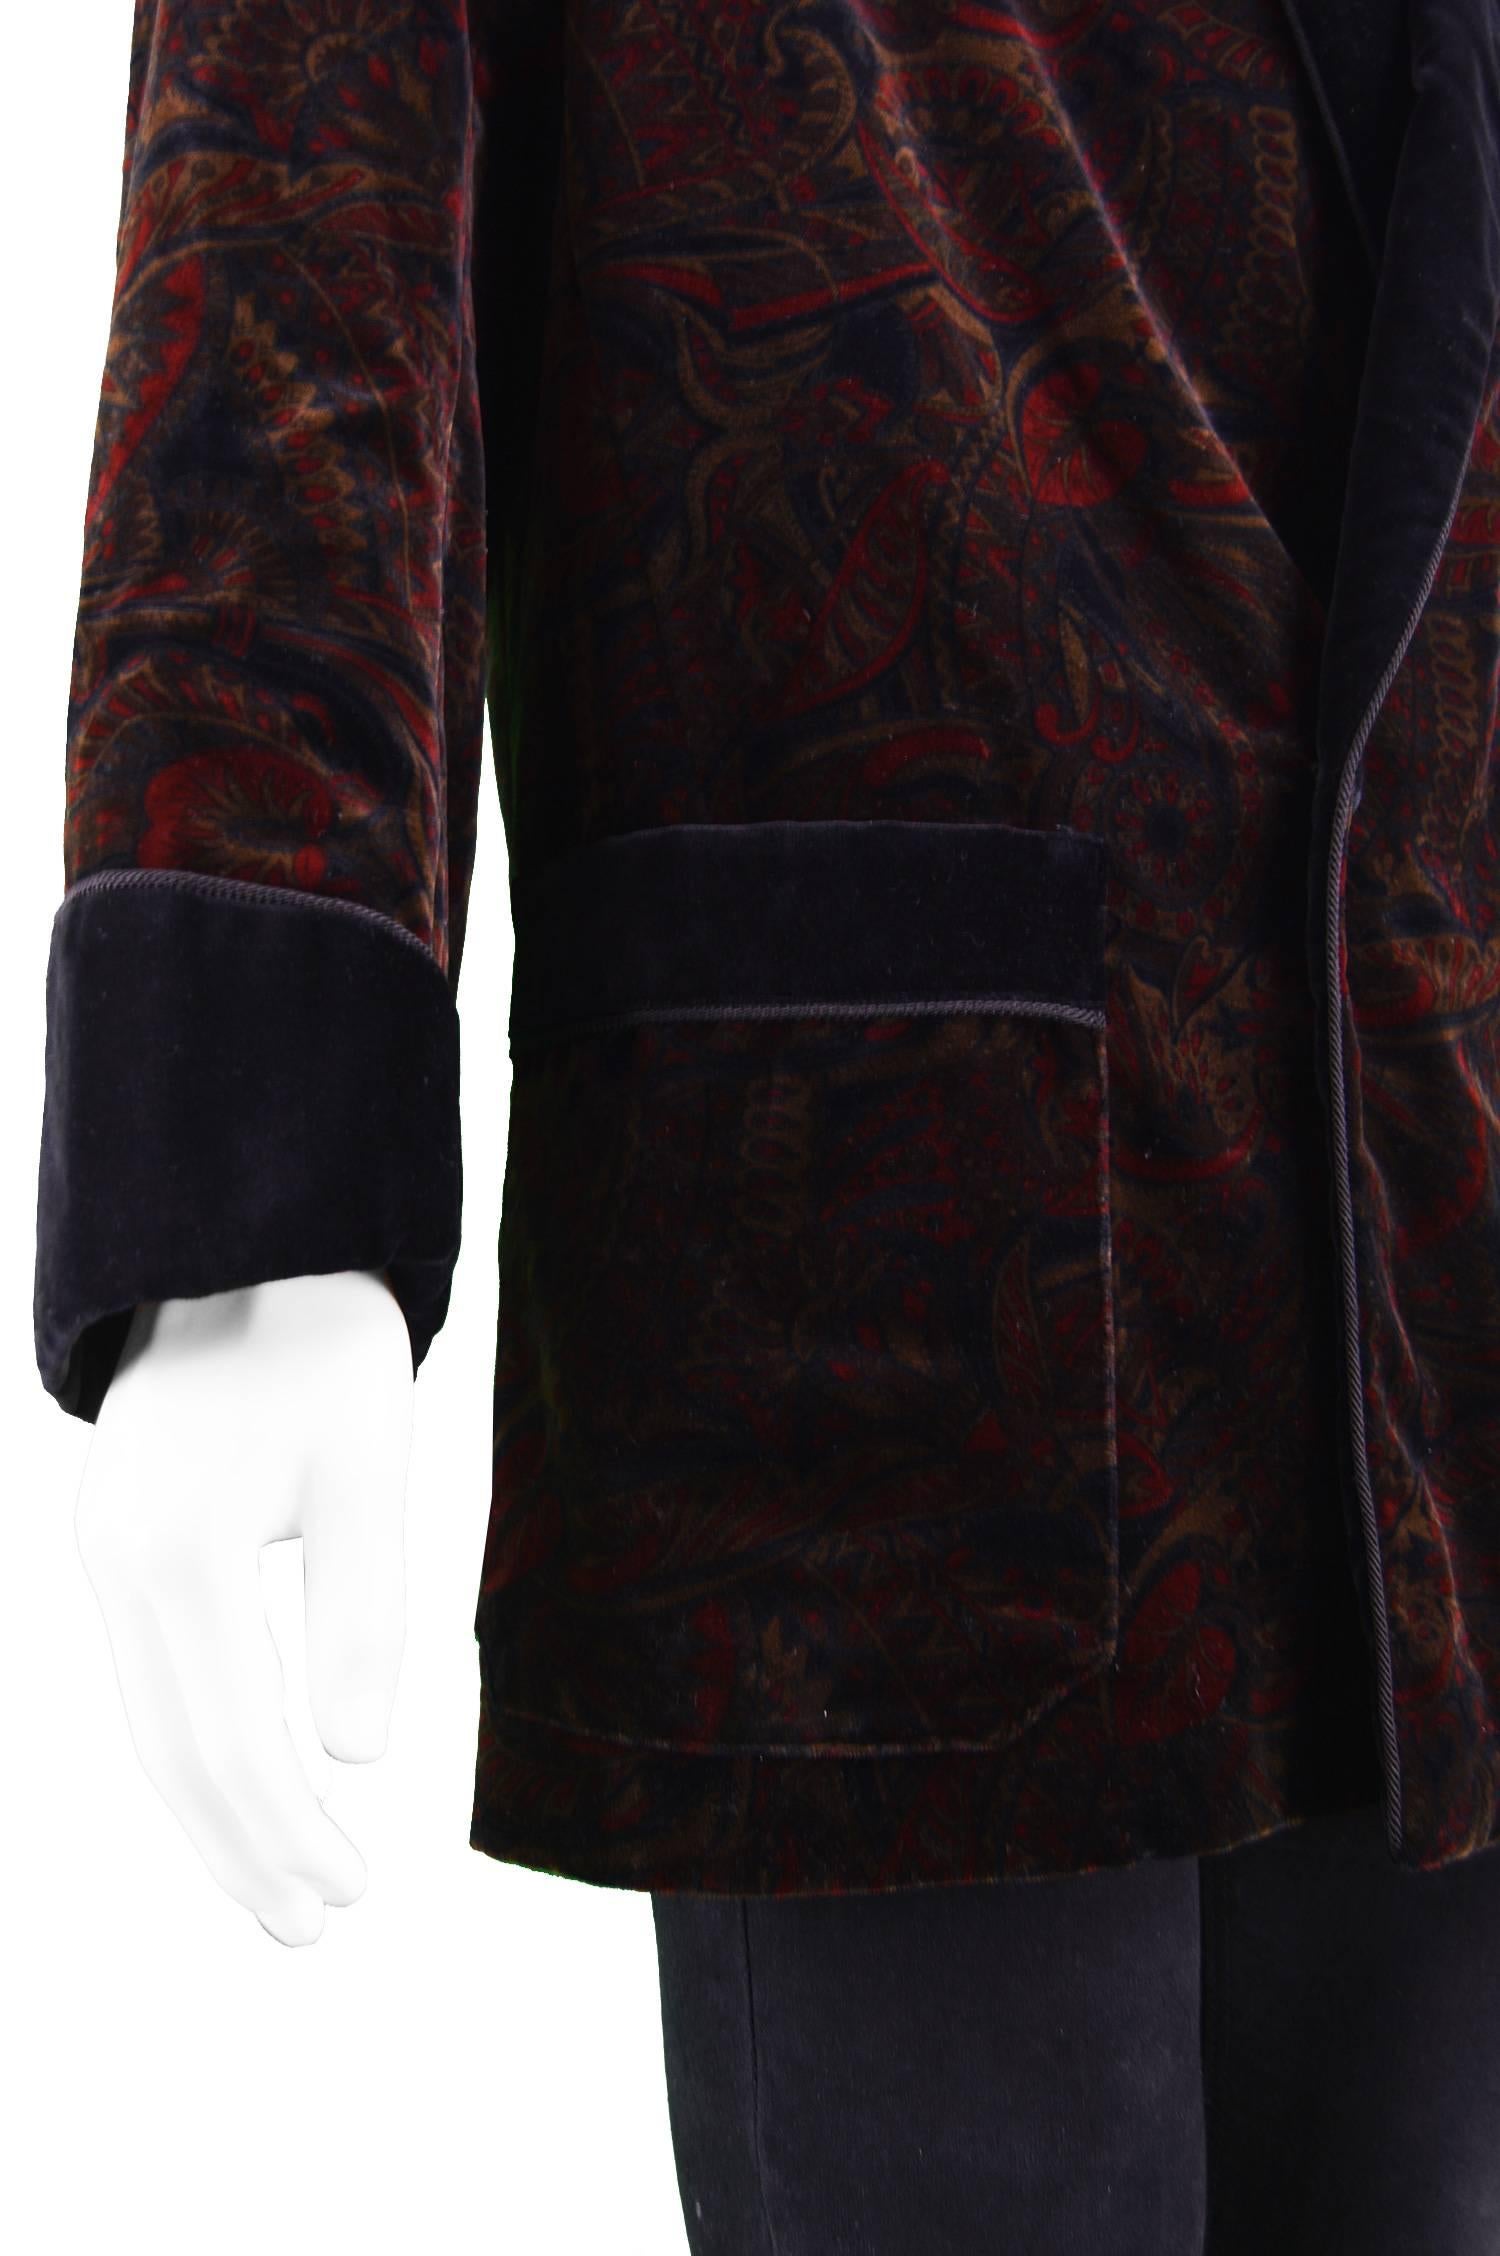 Men's Vintage Paisley Print Velvet Smoking Jacket with Braided Lapels, 1980s In Excellent Condition For Sale In Doncaster, South Yorkshire